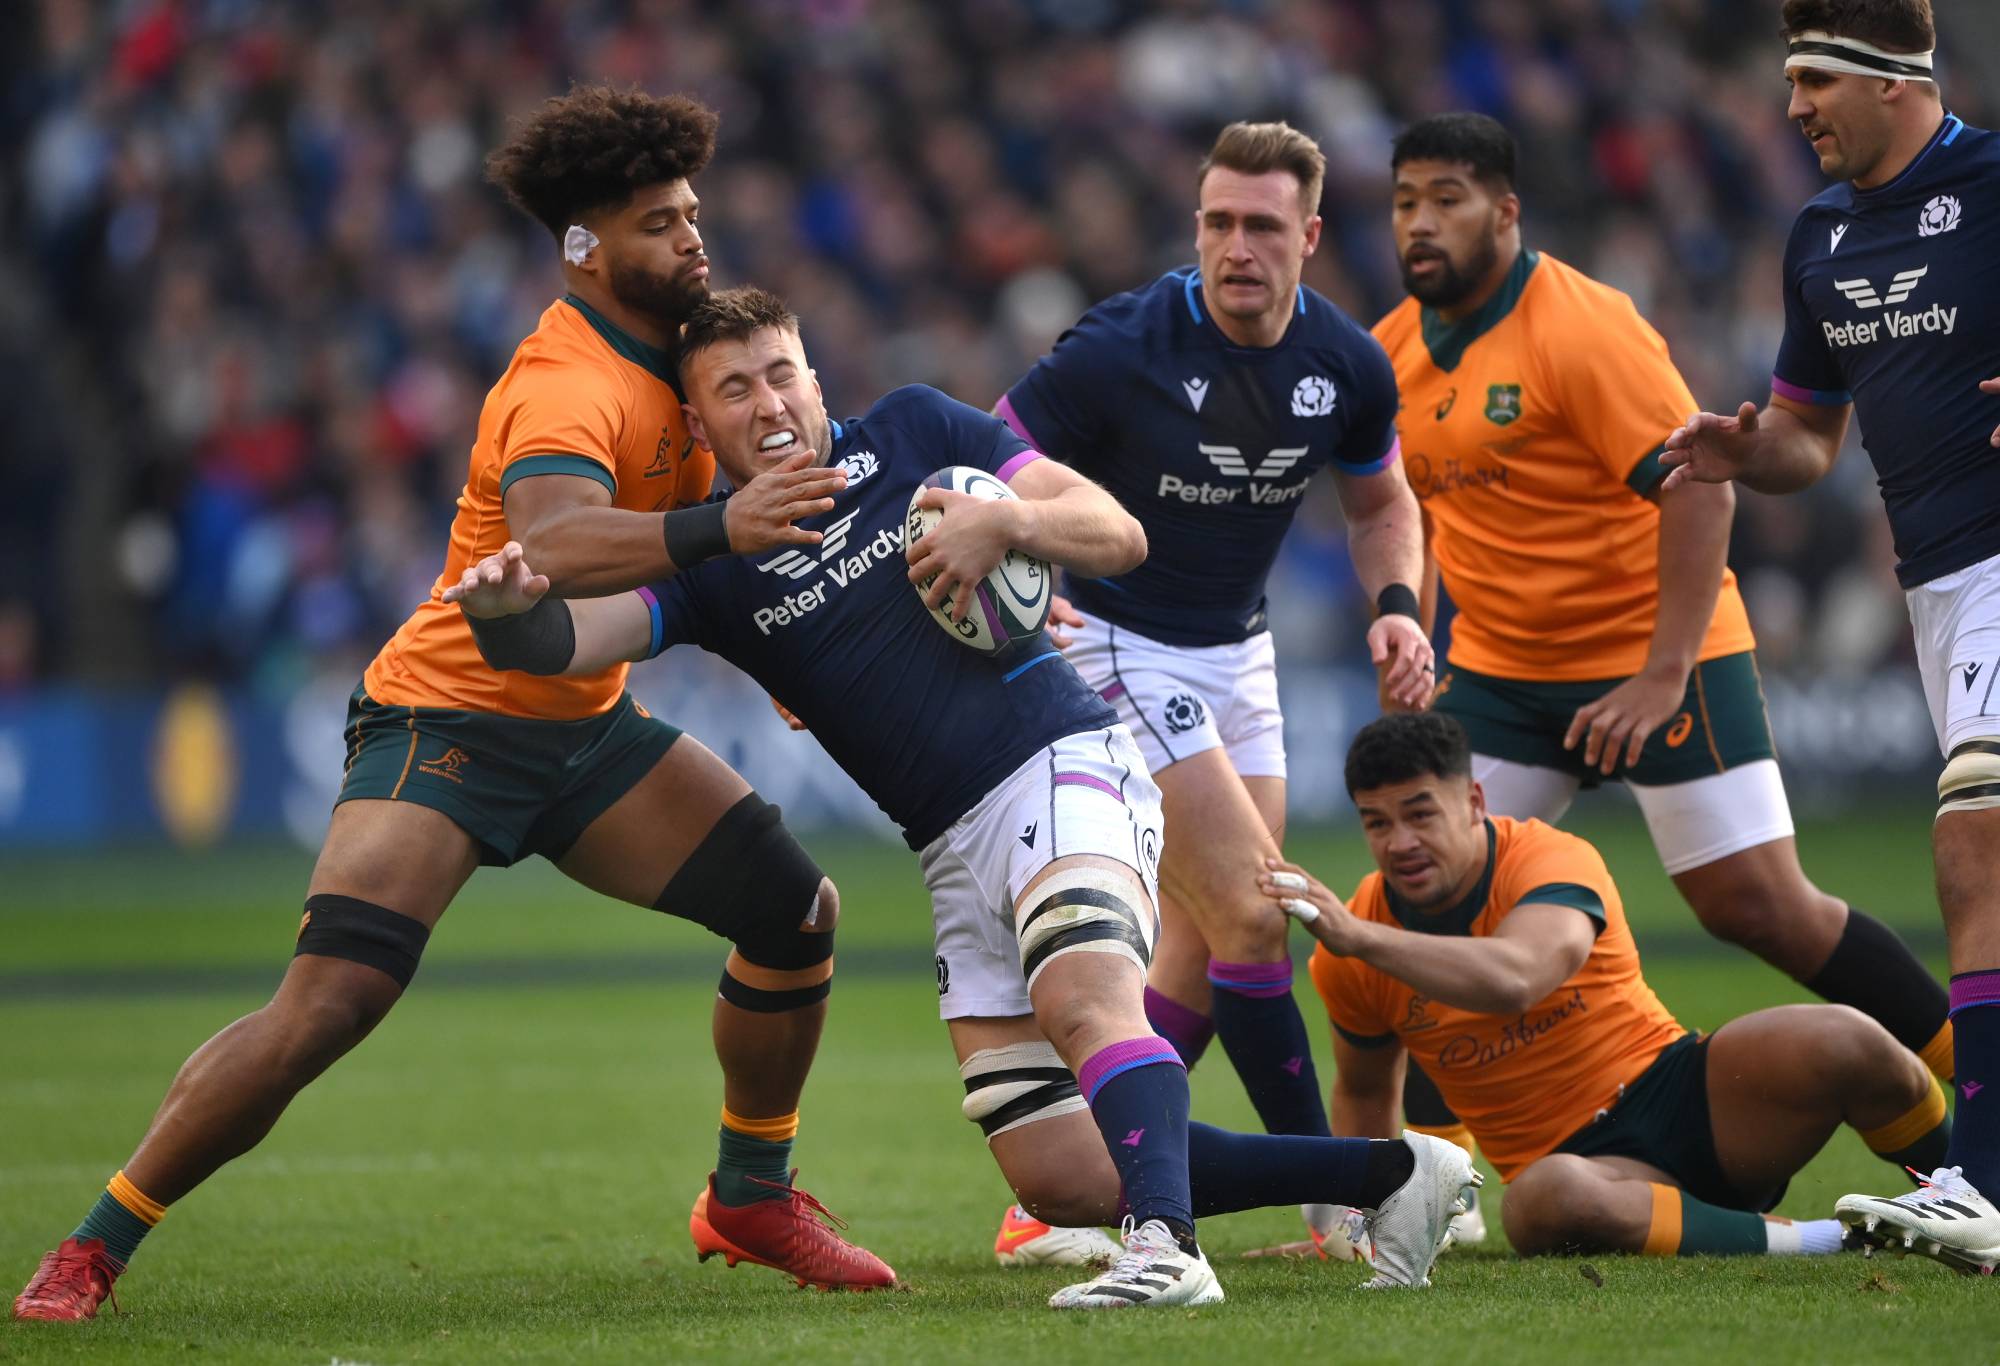 Matt Fagerson of Scotland is tackled by Rob Valetini of Australia during the Autumn Nations Series match between Scotland and Australia at Murrayfield Stadium on November 07, 2021 in Edinburgh, Scotland. (Photo by Stu Forster/Getty Images)